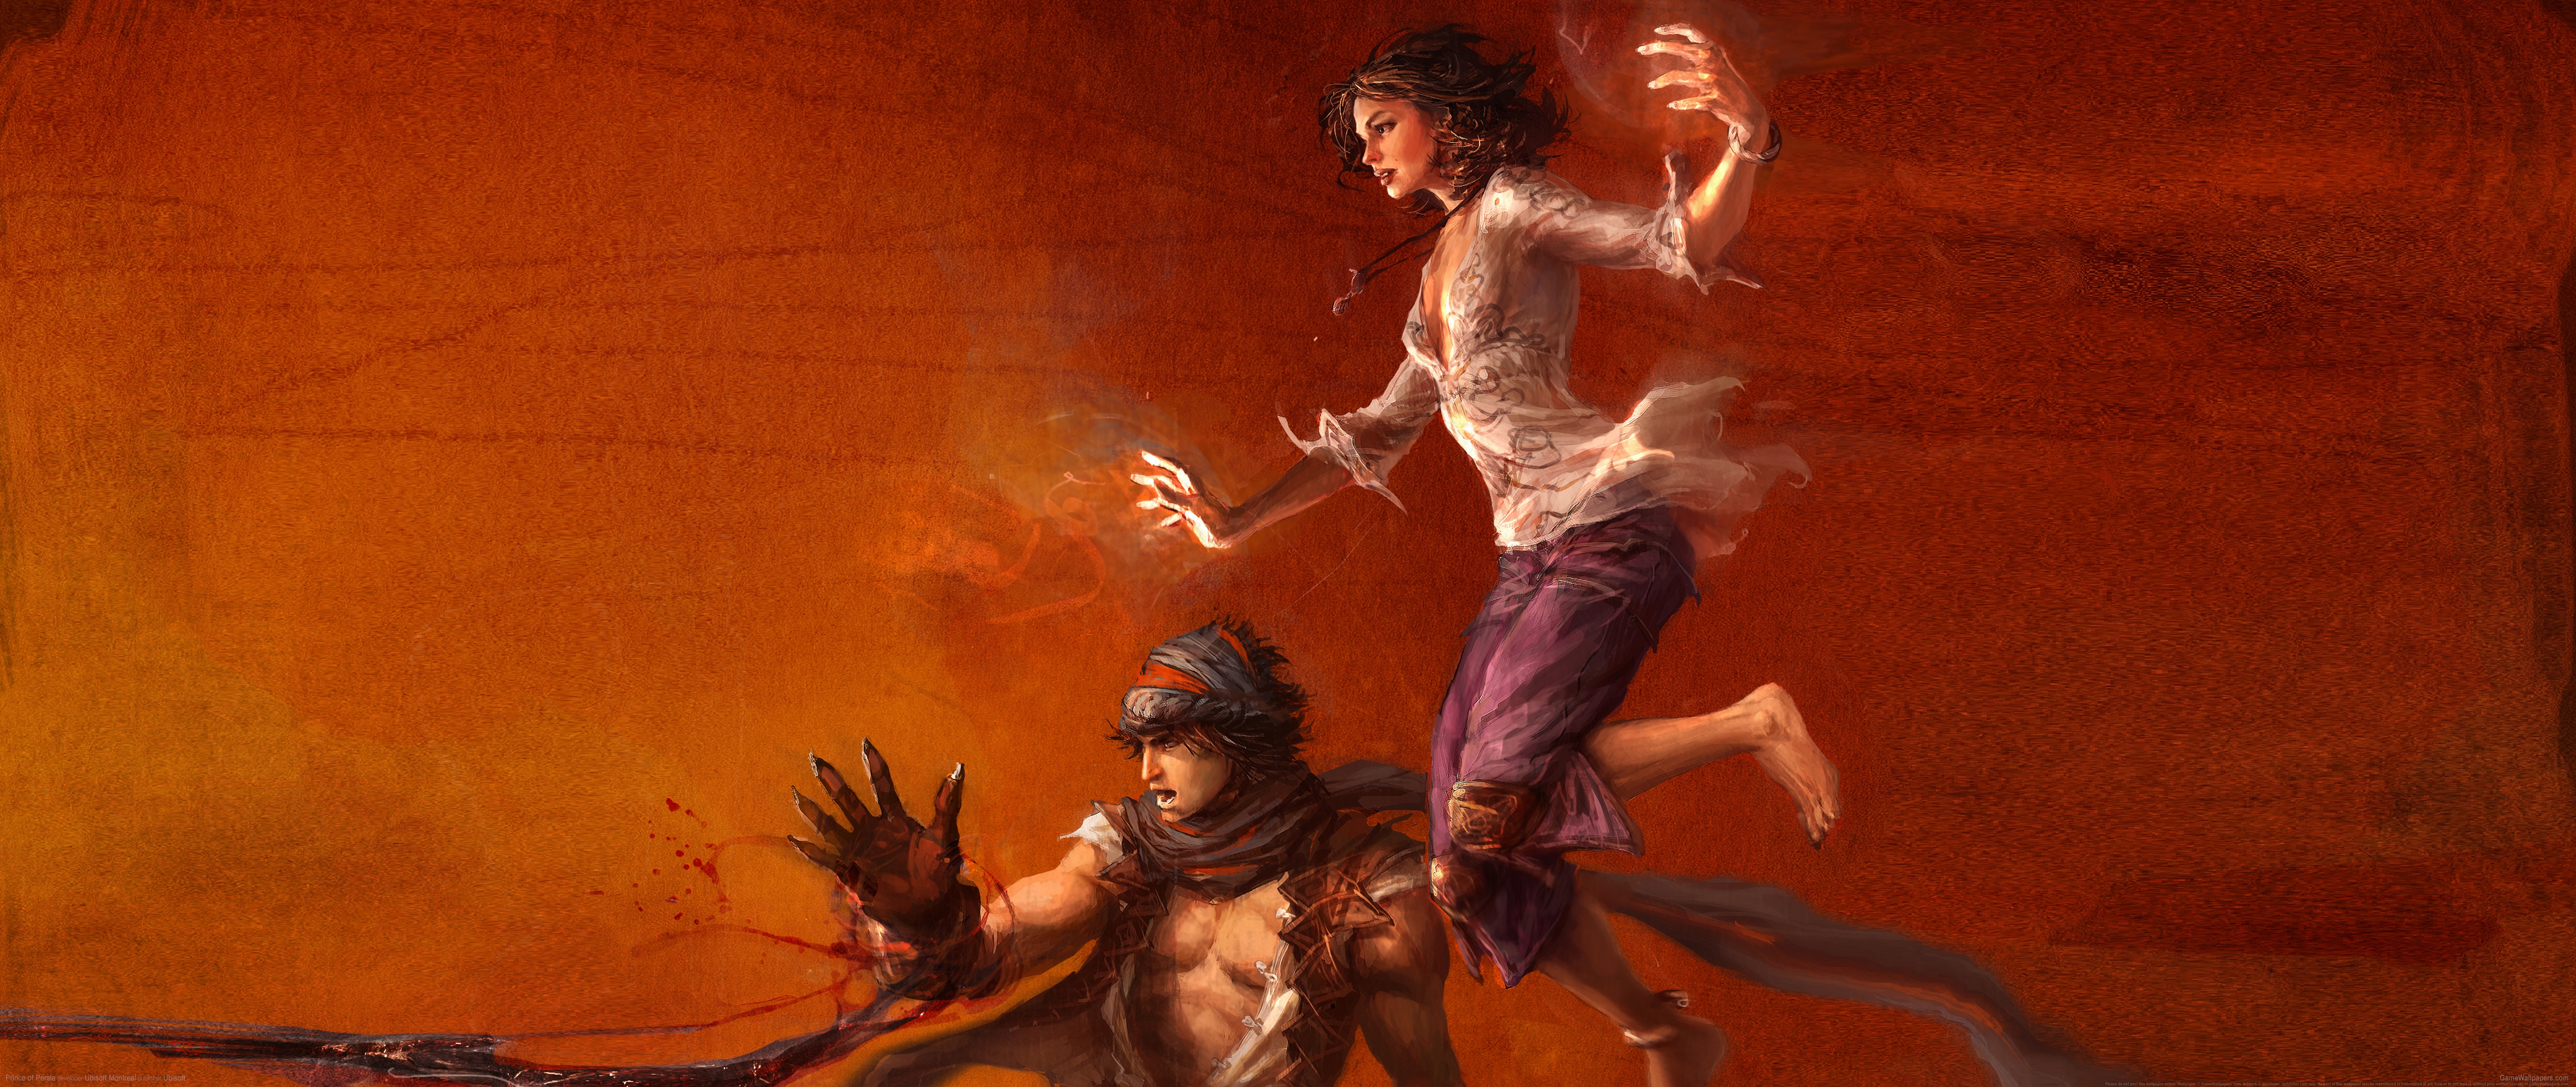 Prince of Persia 5120x2160 wallpaper or background 07